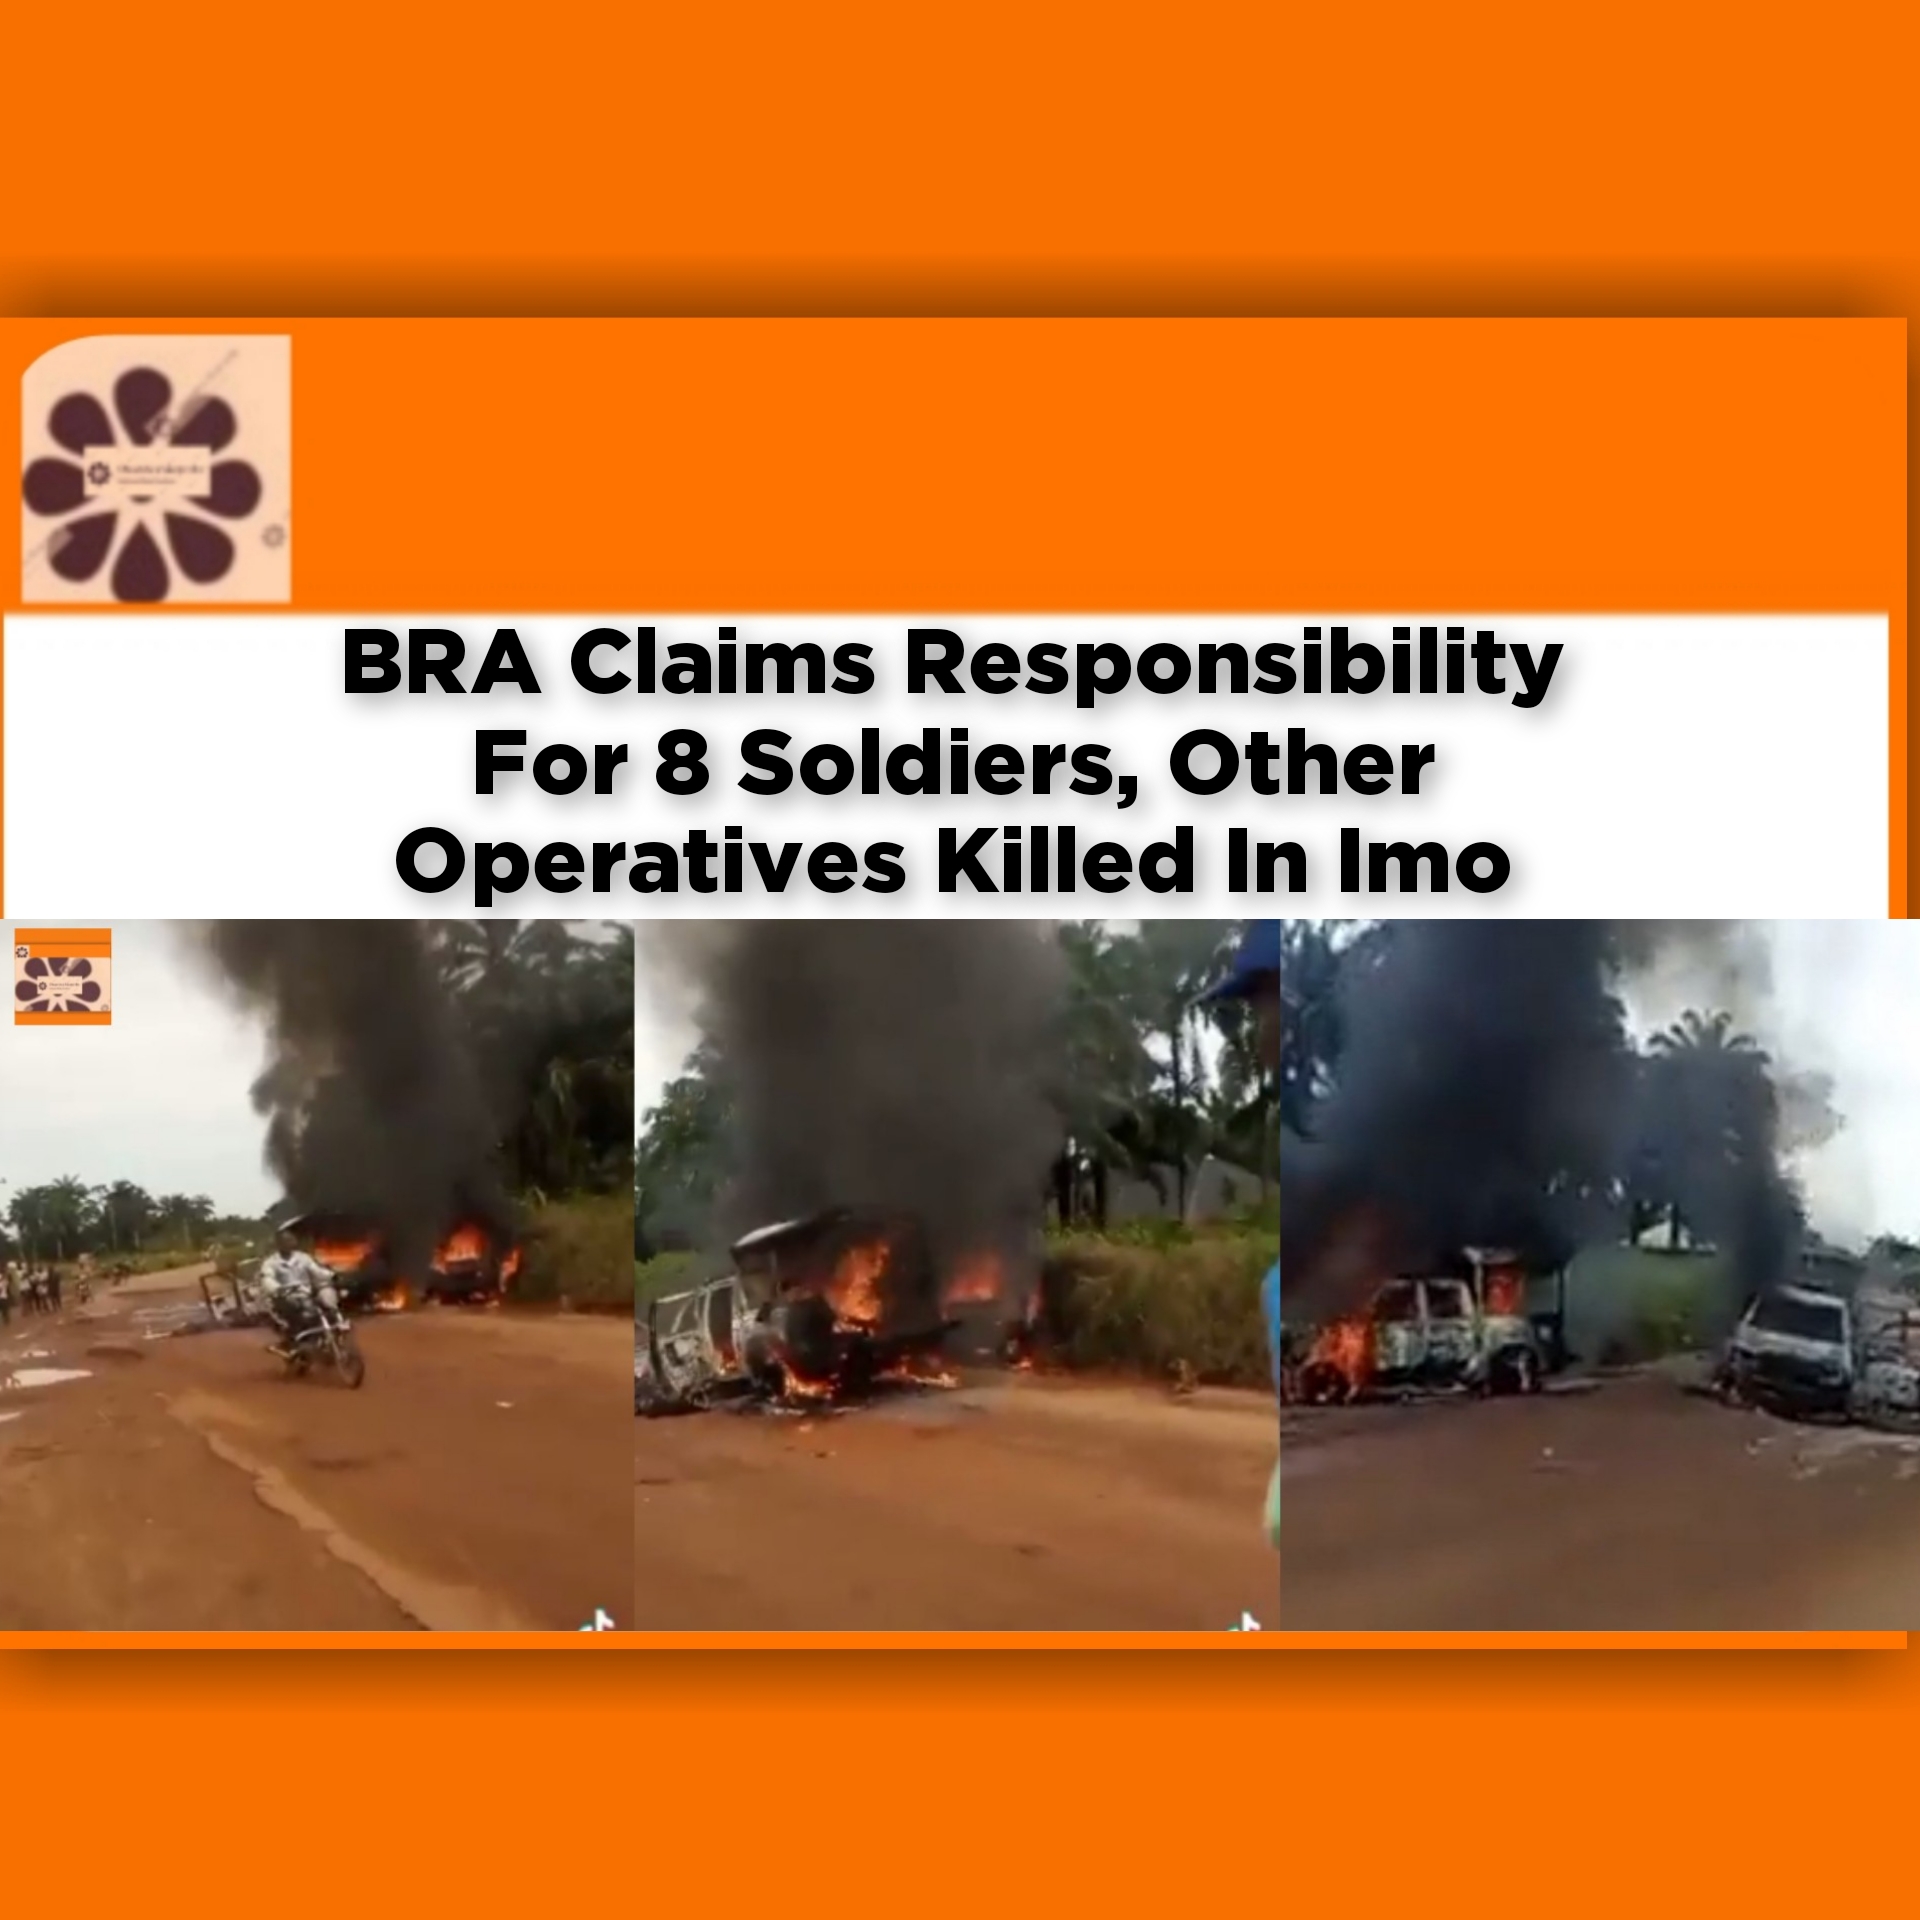 BRA Claims Responsibility For 8 Soldiers, Other Operatives Killed In Imo ~ OsazuwaAkonedo #Drug